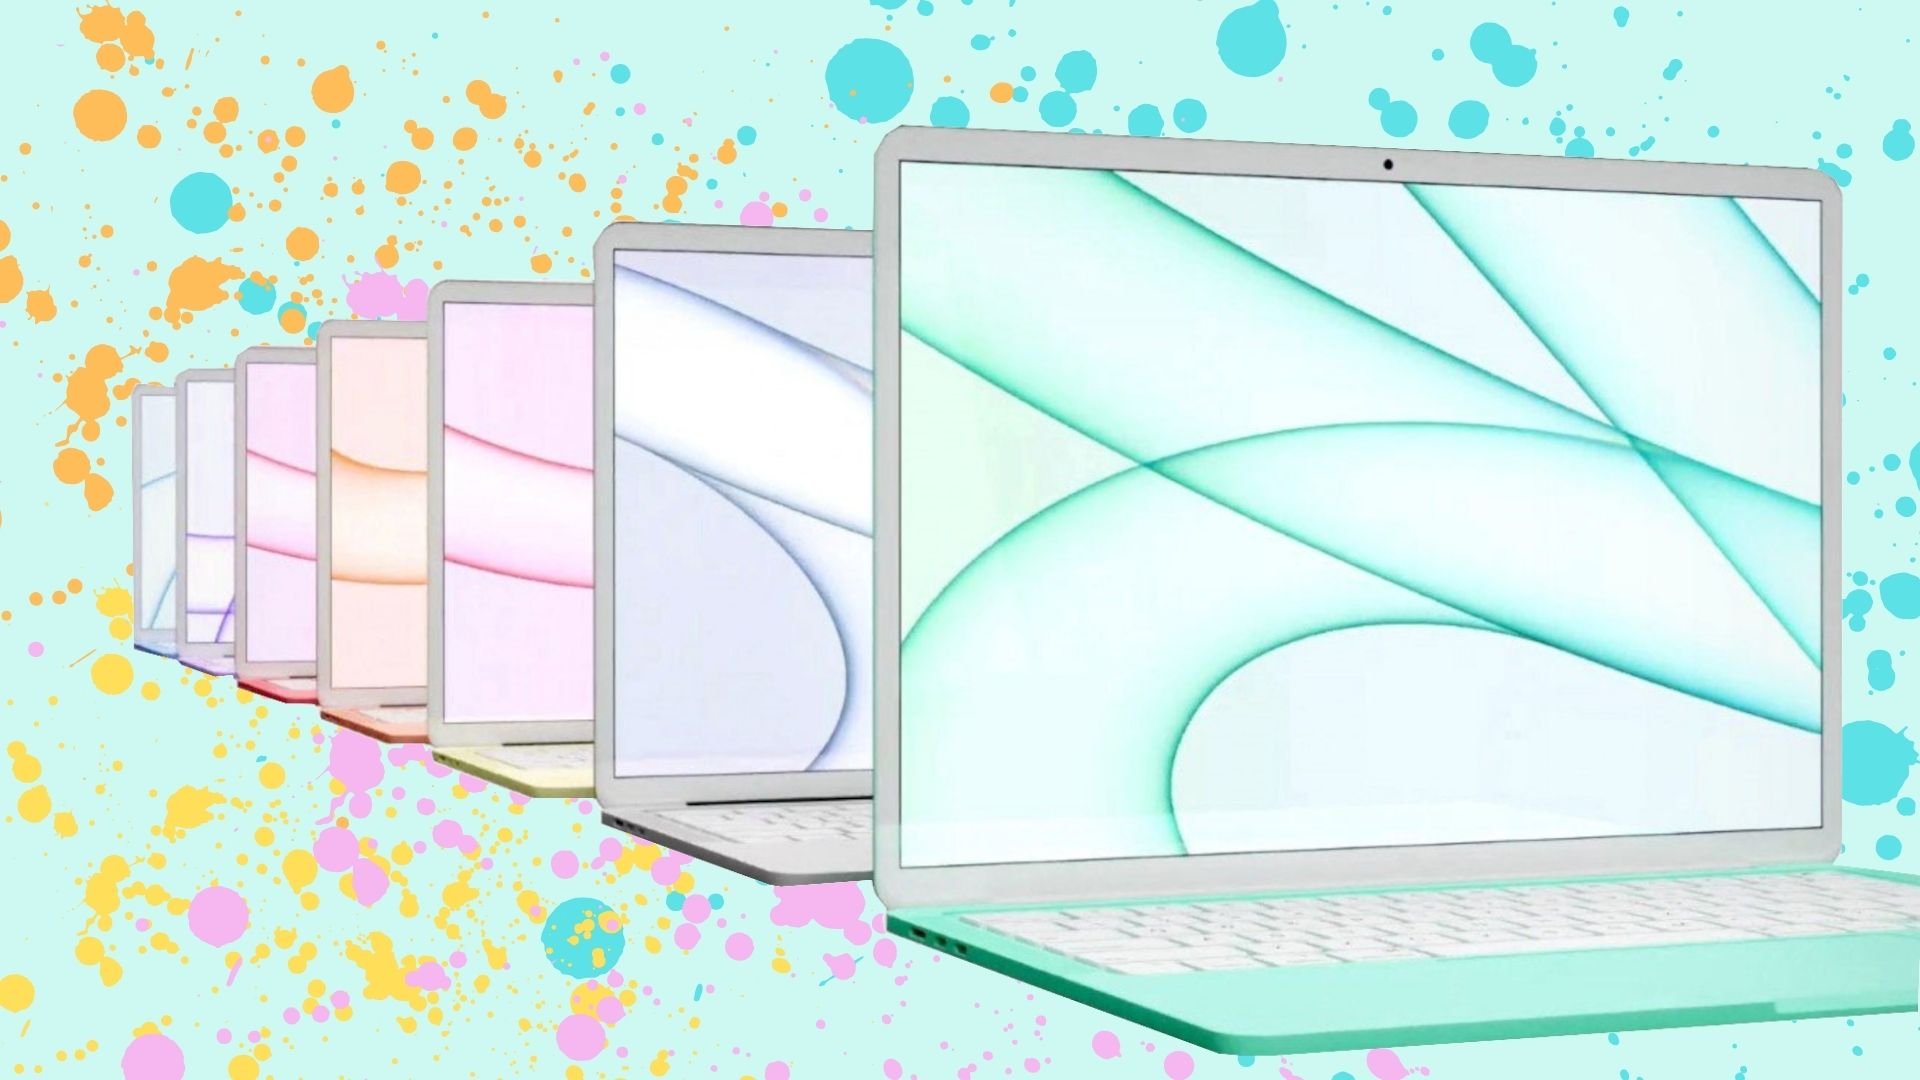 The MacBook Air (2022) laptop comes in a colorful variety. Shown here on a striking pastel background